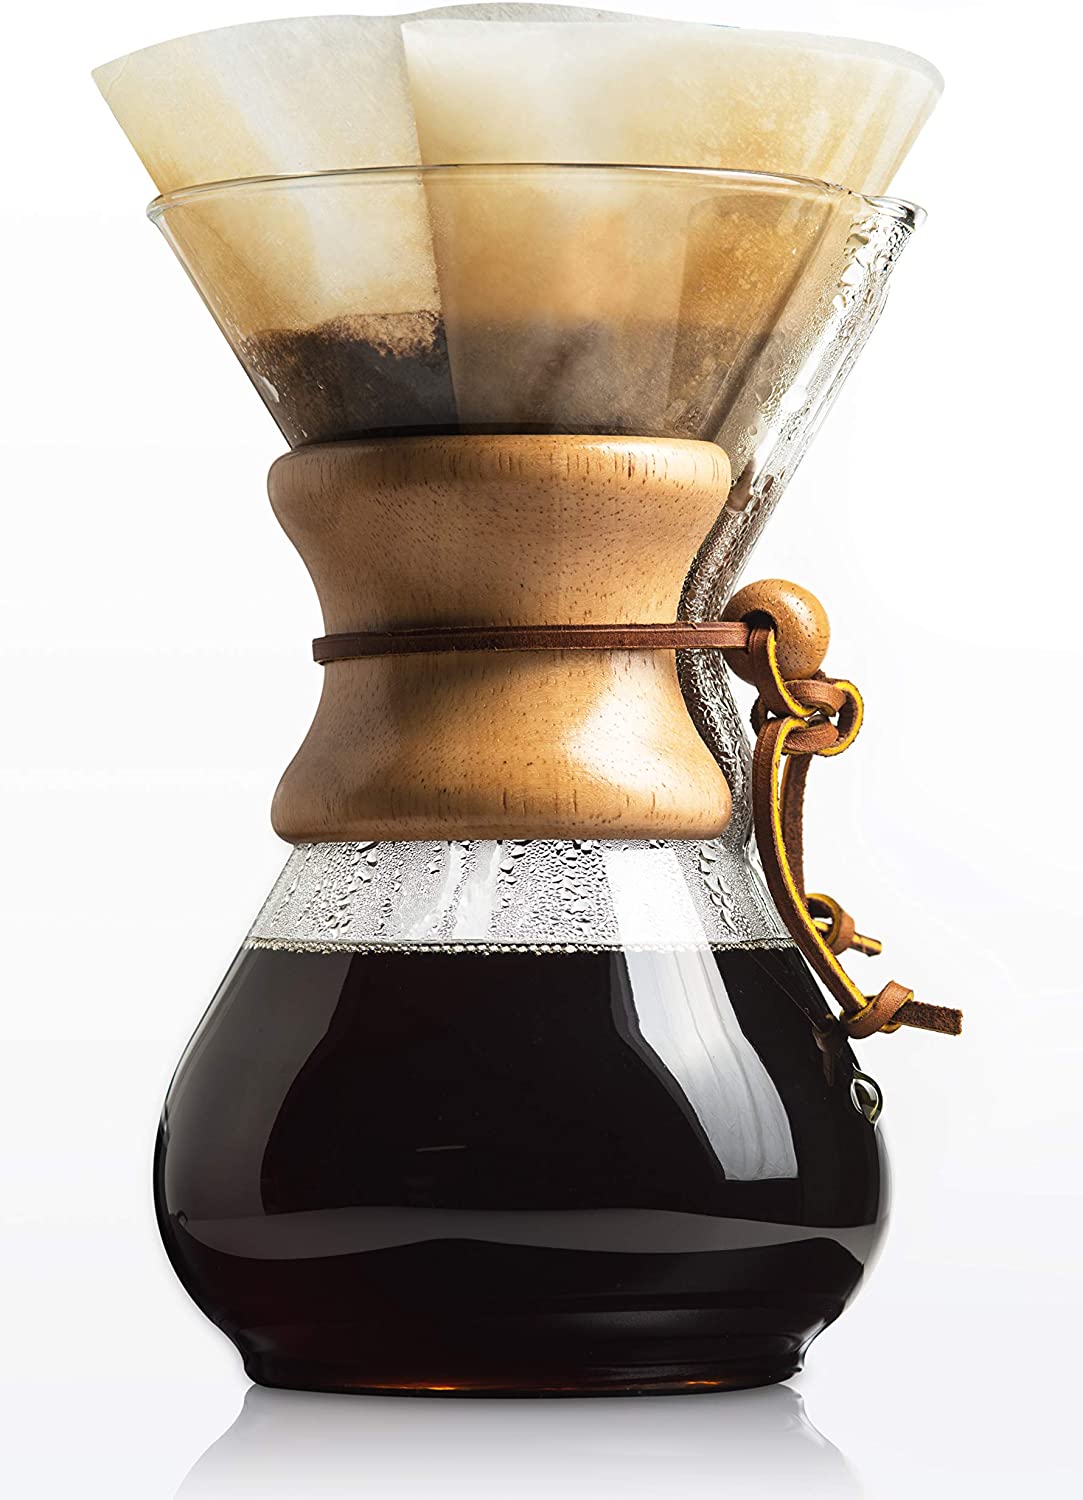 6. Chemex Pour Over Coffee Maker  